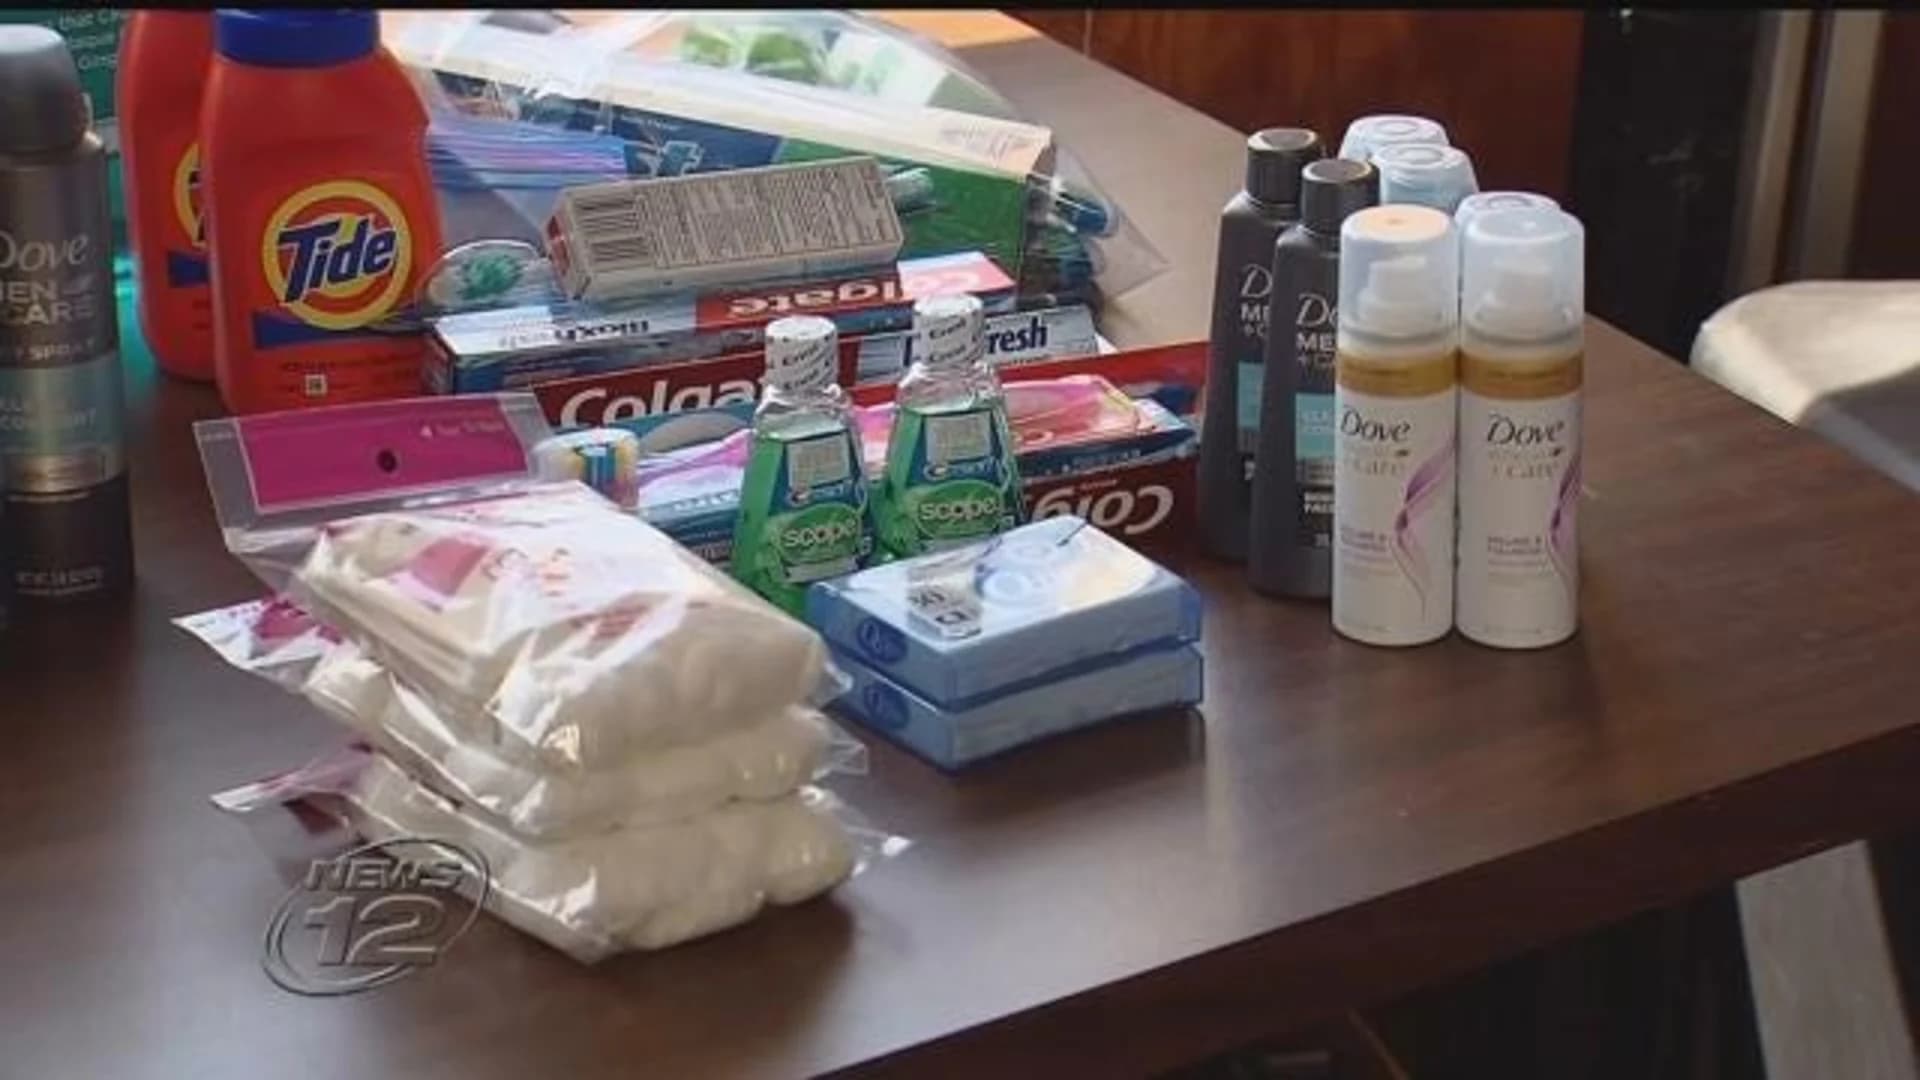 New Jersey residents work to gather donations for Harvey victims